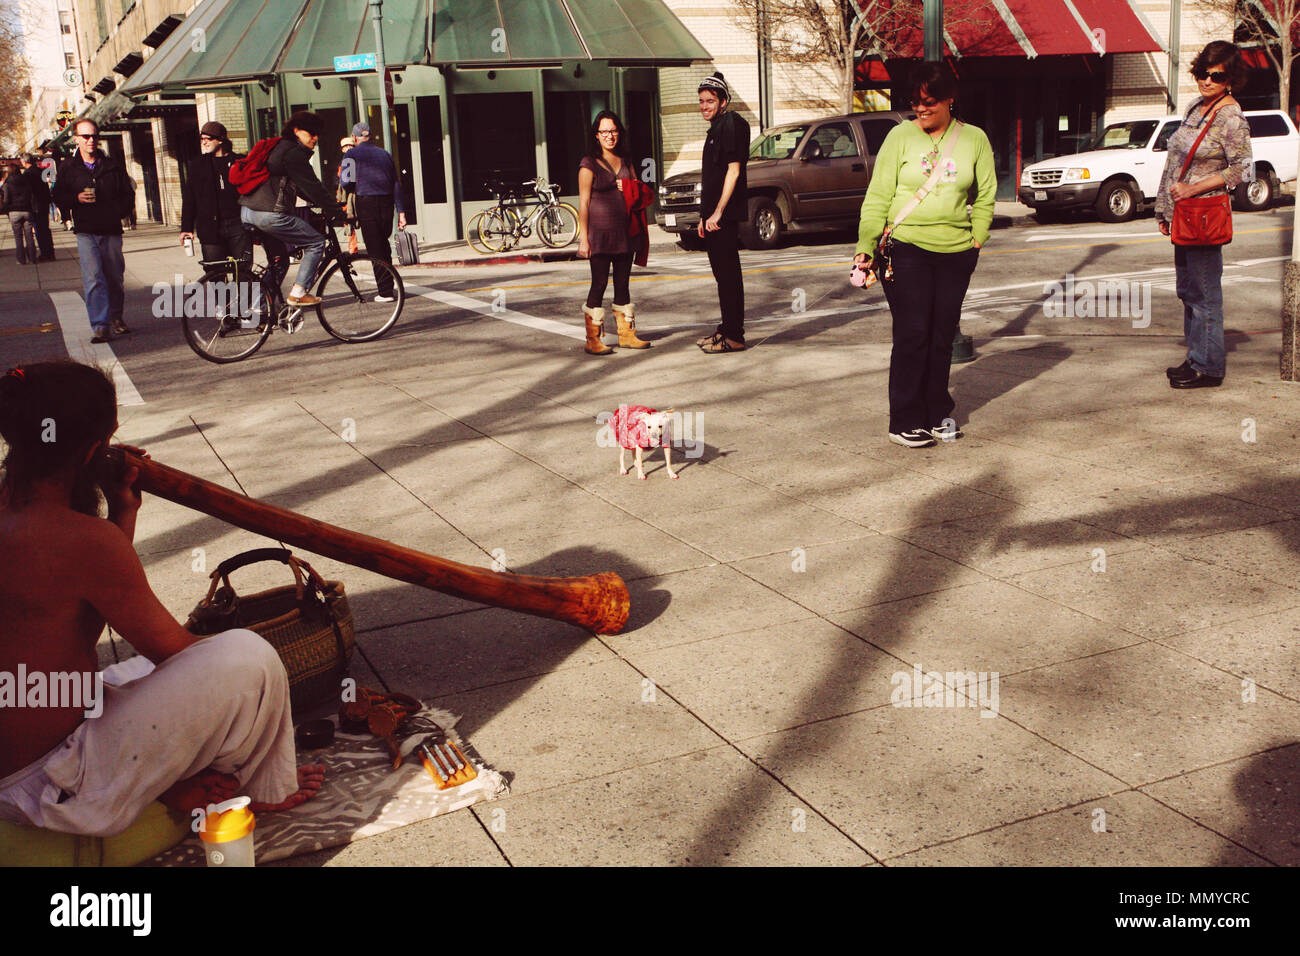 Santa Cruz, California, January 15, 2012: Street scene with little chihuahua freaking out from treet musician Stock Photo